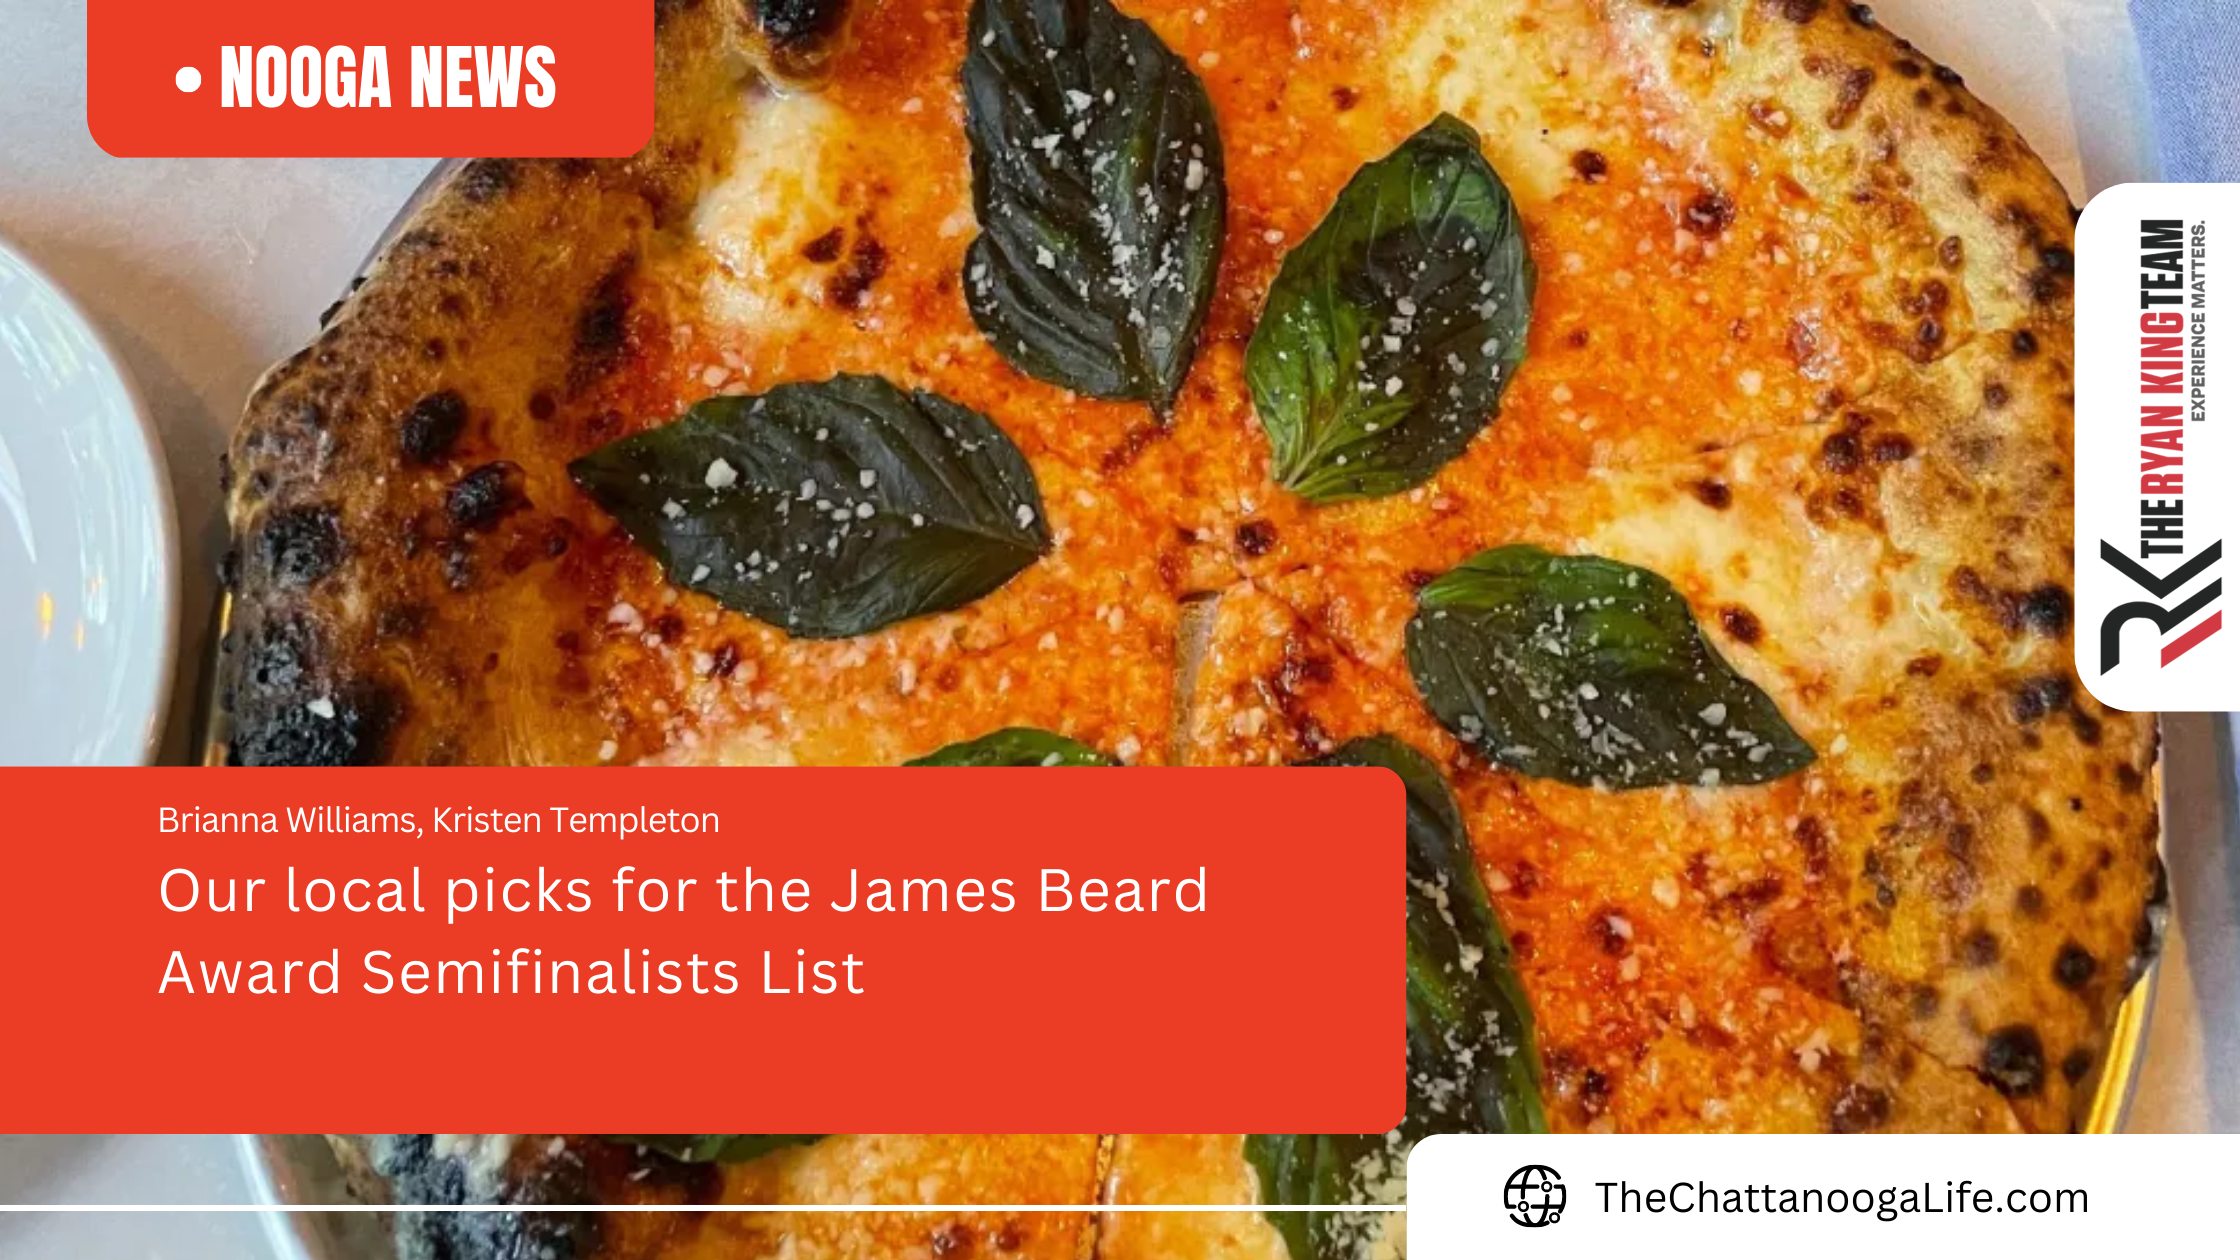 Our local picks for the James Beard Award Semifinalists List